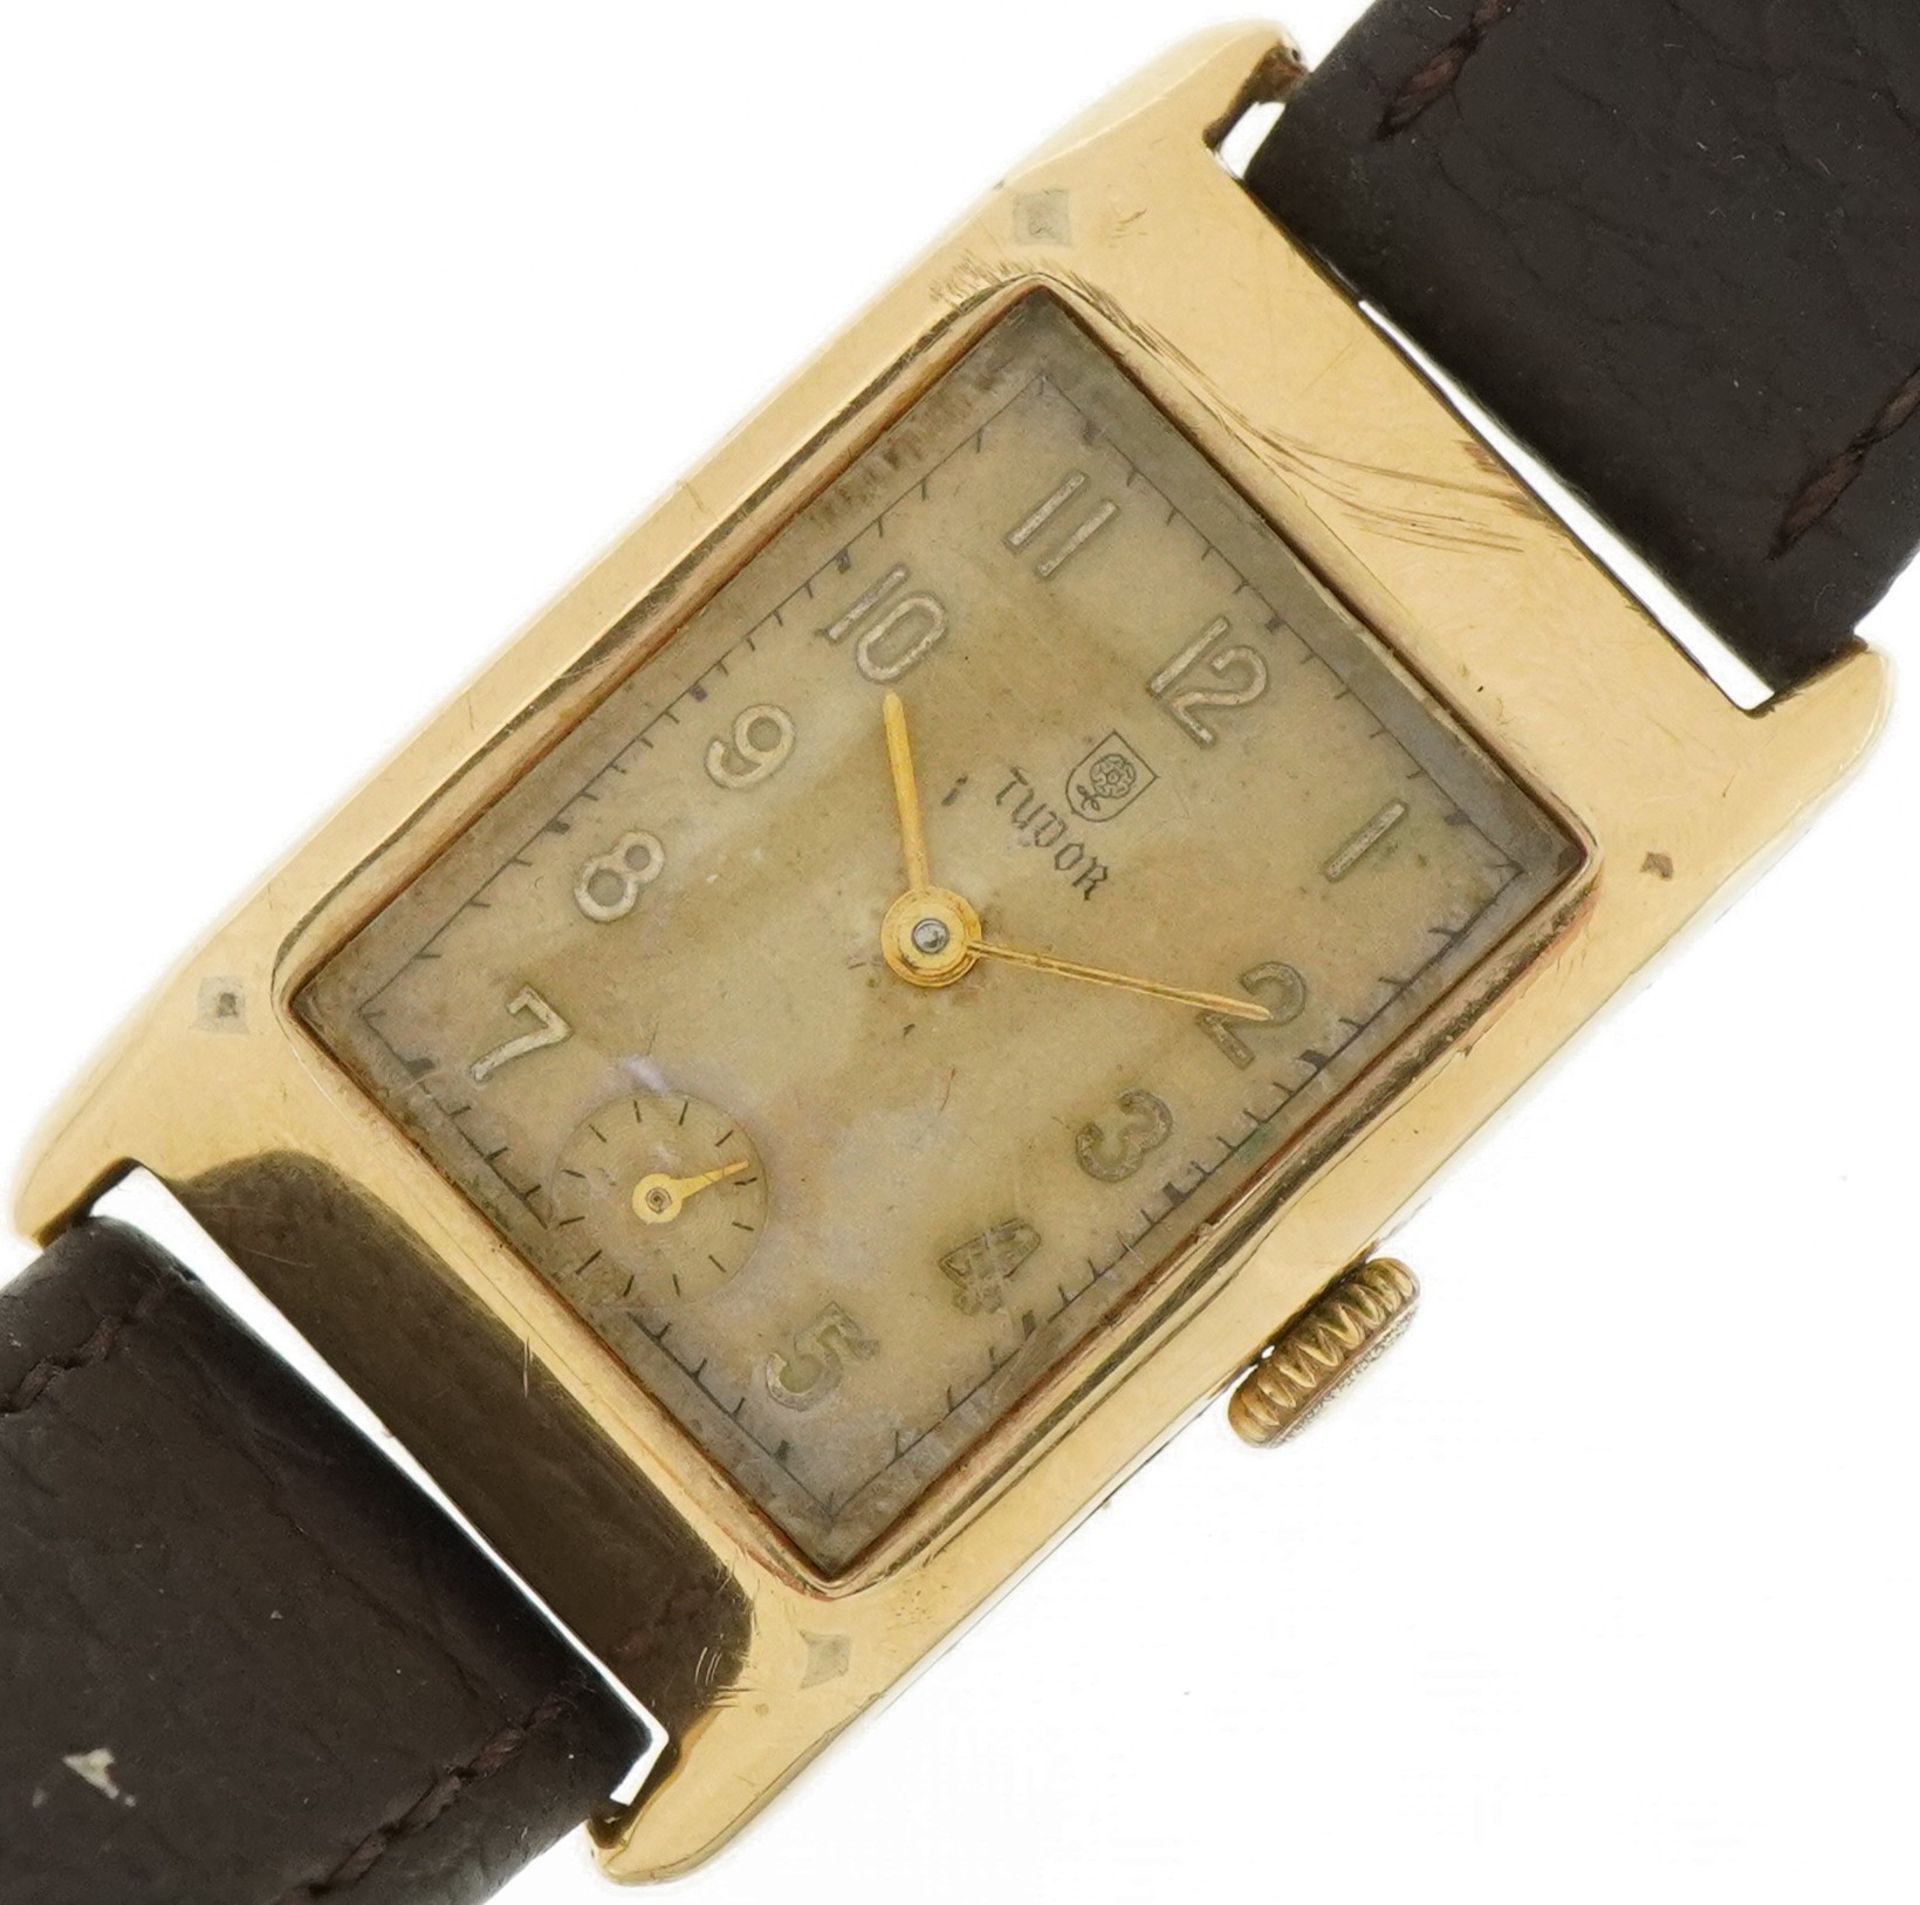 Tudor, gentlemen's 9ct gold wristwatch with subsidiary dial, the case 22mm wide, total weight 22.